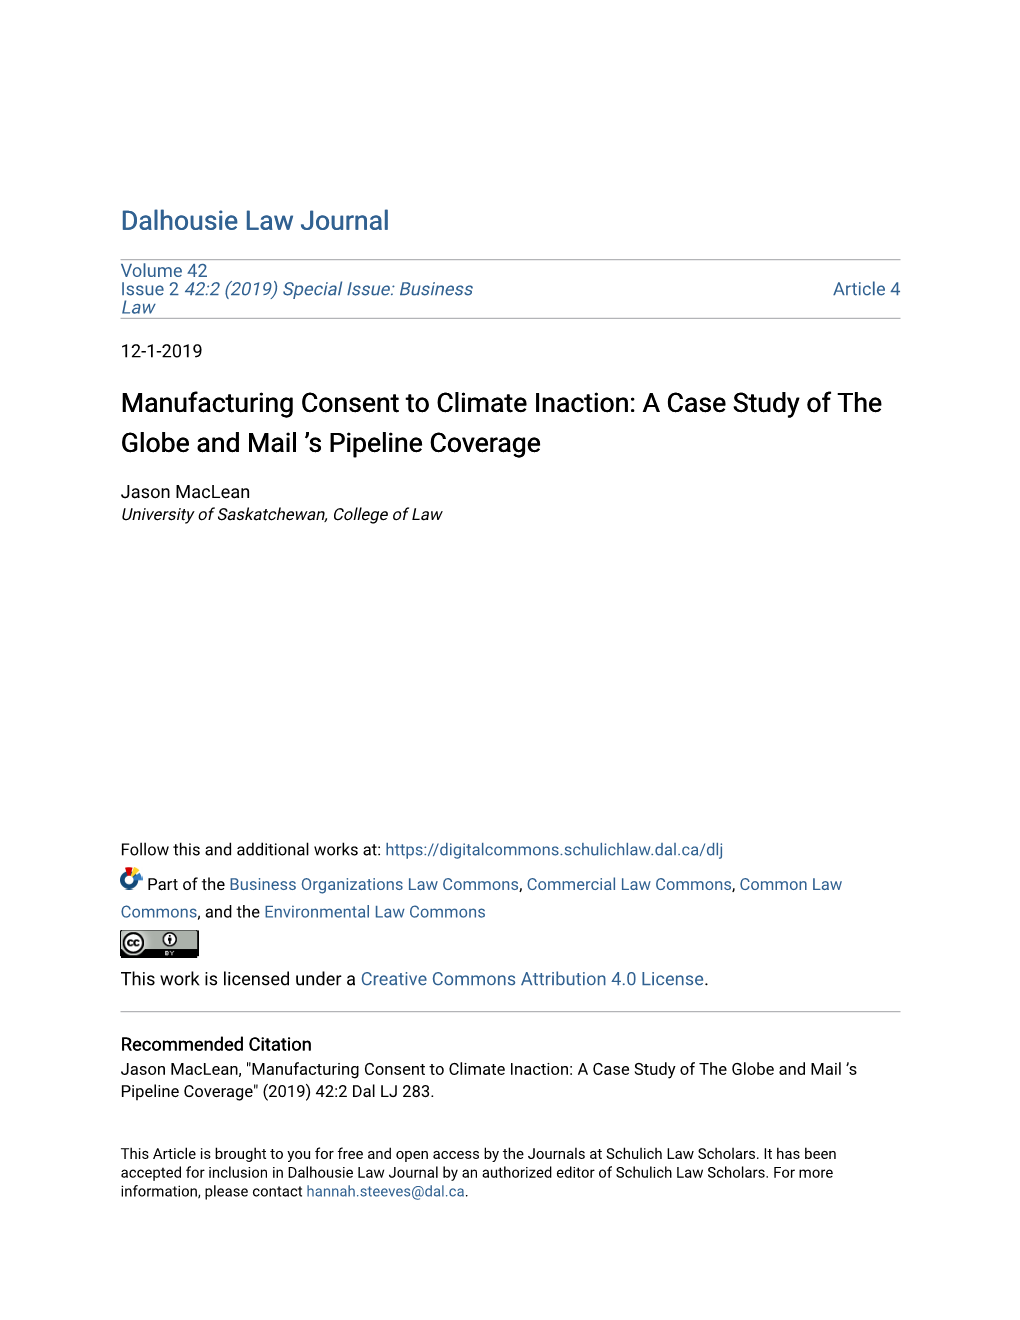 Manufacturing Consent to Climate Inaction: a Case Study of the Globe and Mail ’S Pipeline Coverage